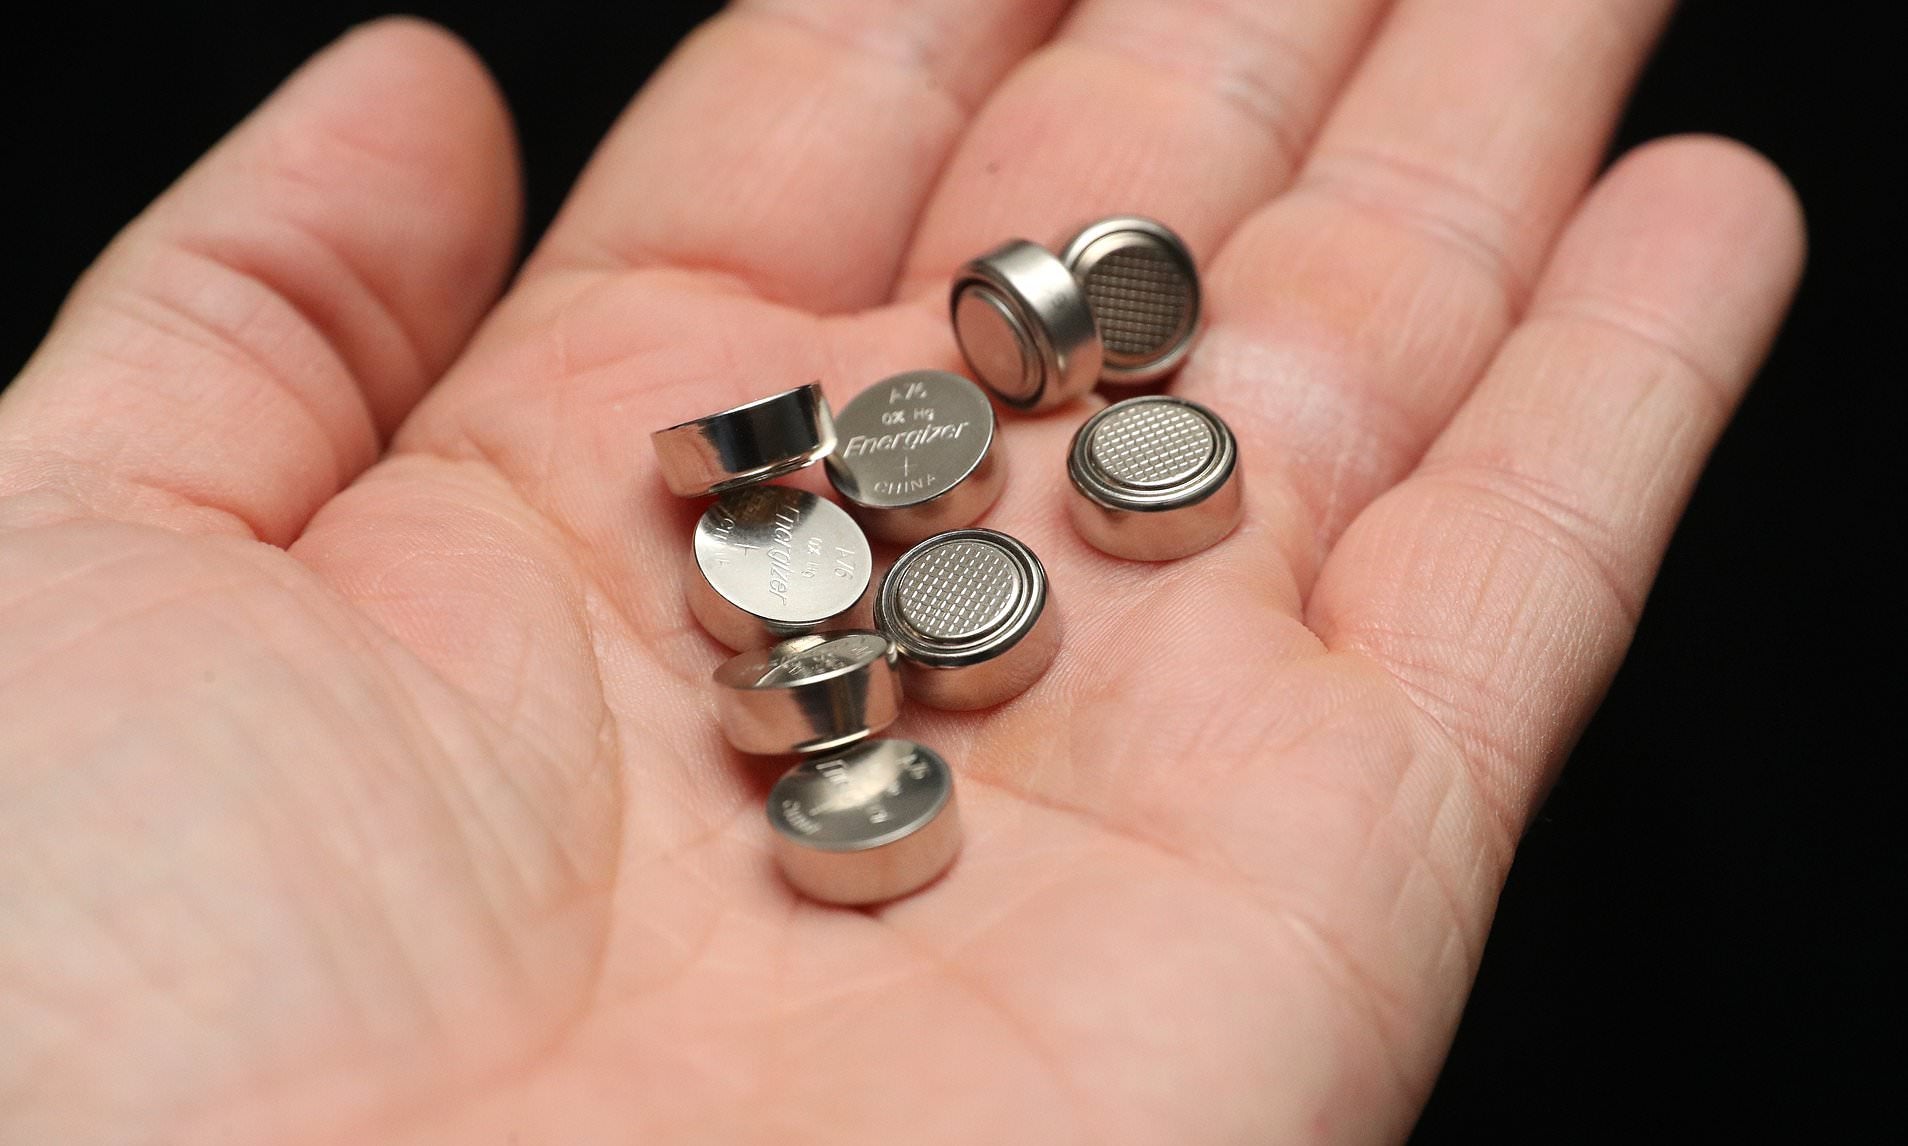 2yo Swallows 20 Button Batteries As She Thought They Were Candy, Almost Dies - WORLD OF BUZZ 1